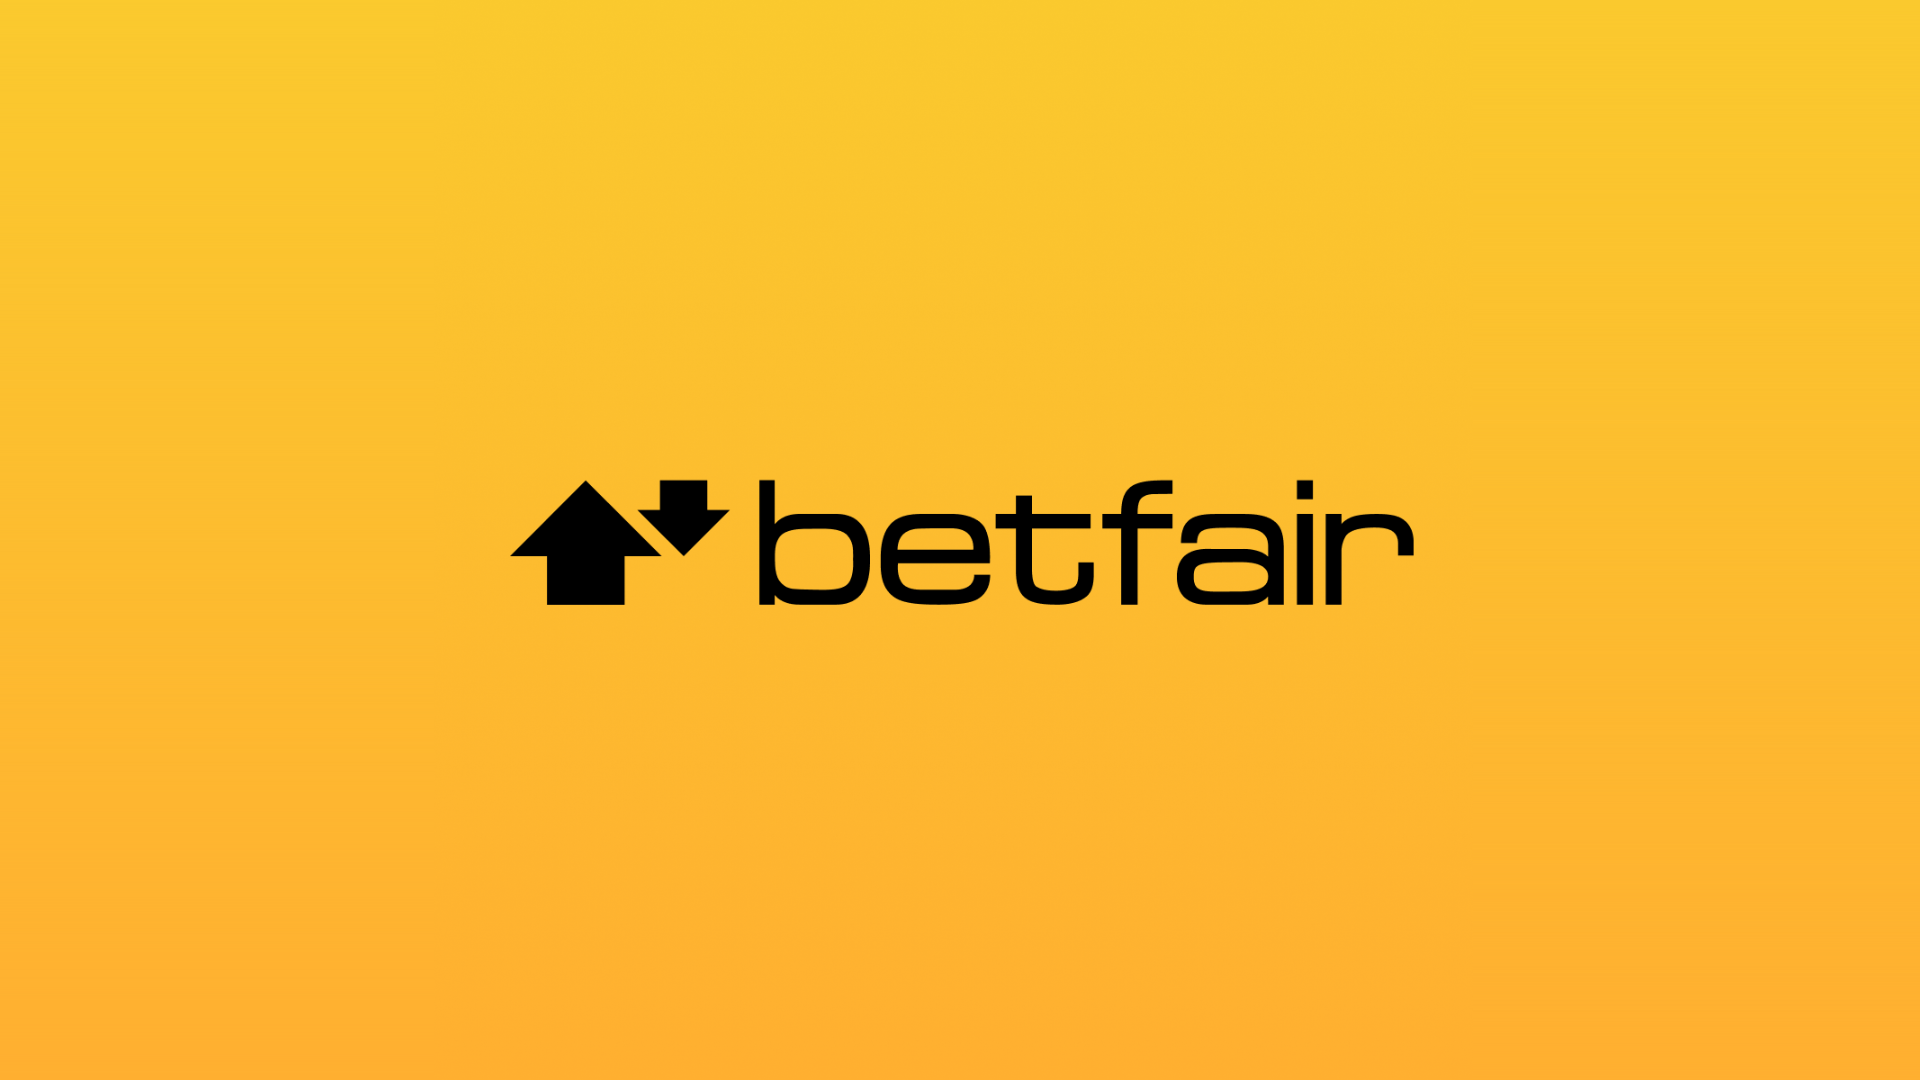 Man City v Man United Free Bets – Get 30/1 on a Goal to be Scored with Betfair